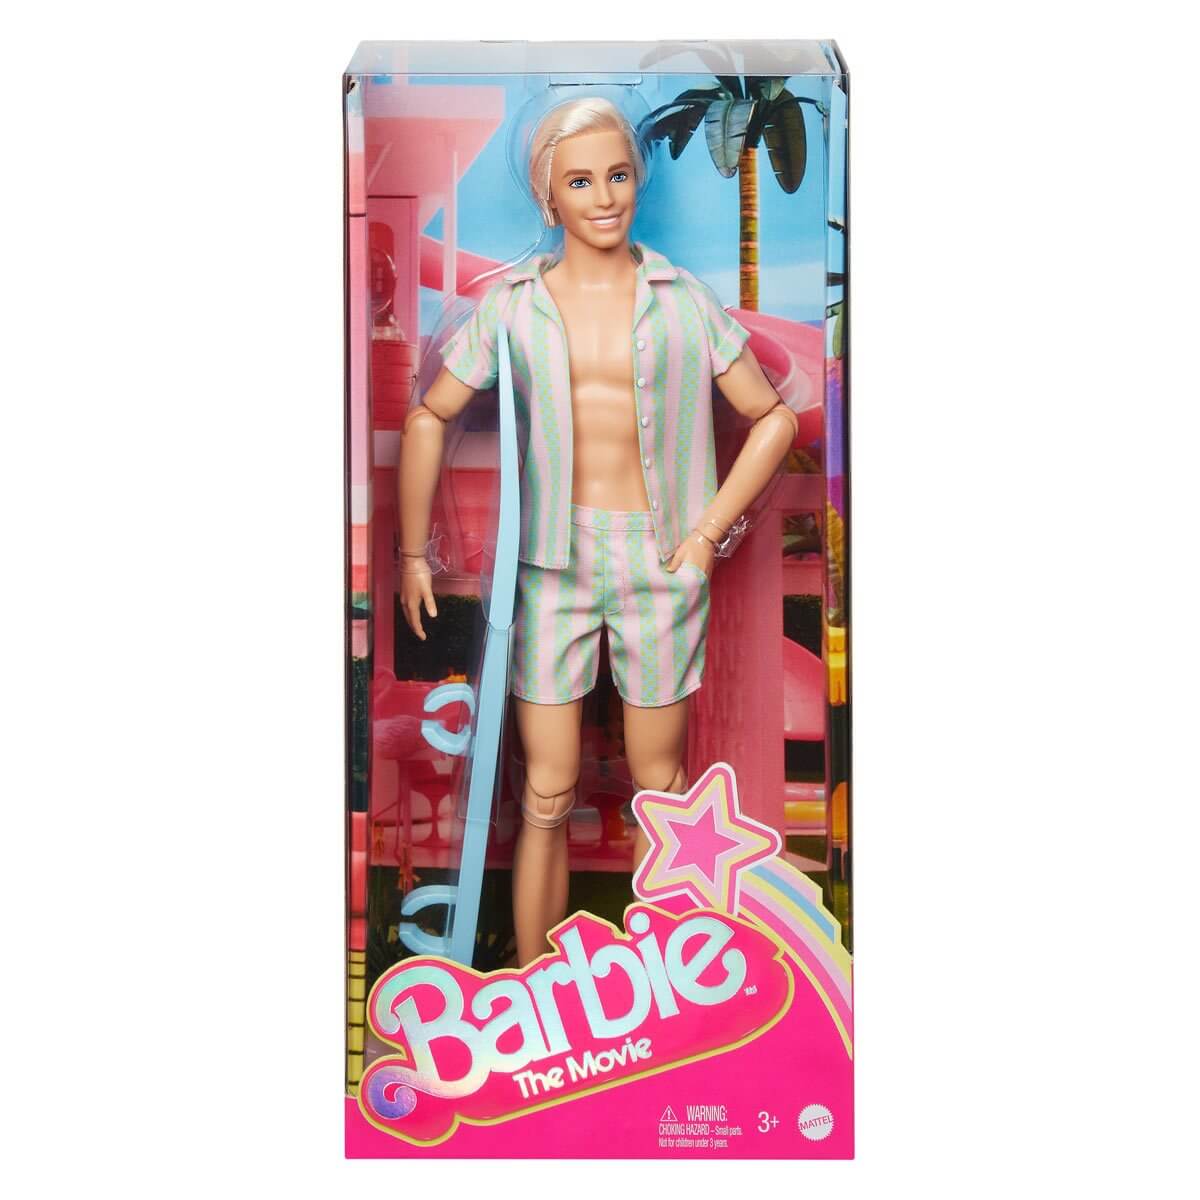 Buy Barbie The Movie Collectible Ken Doll Wearing All-Denim Matching Set